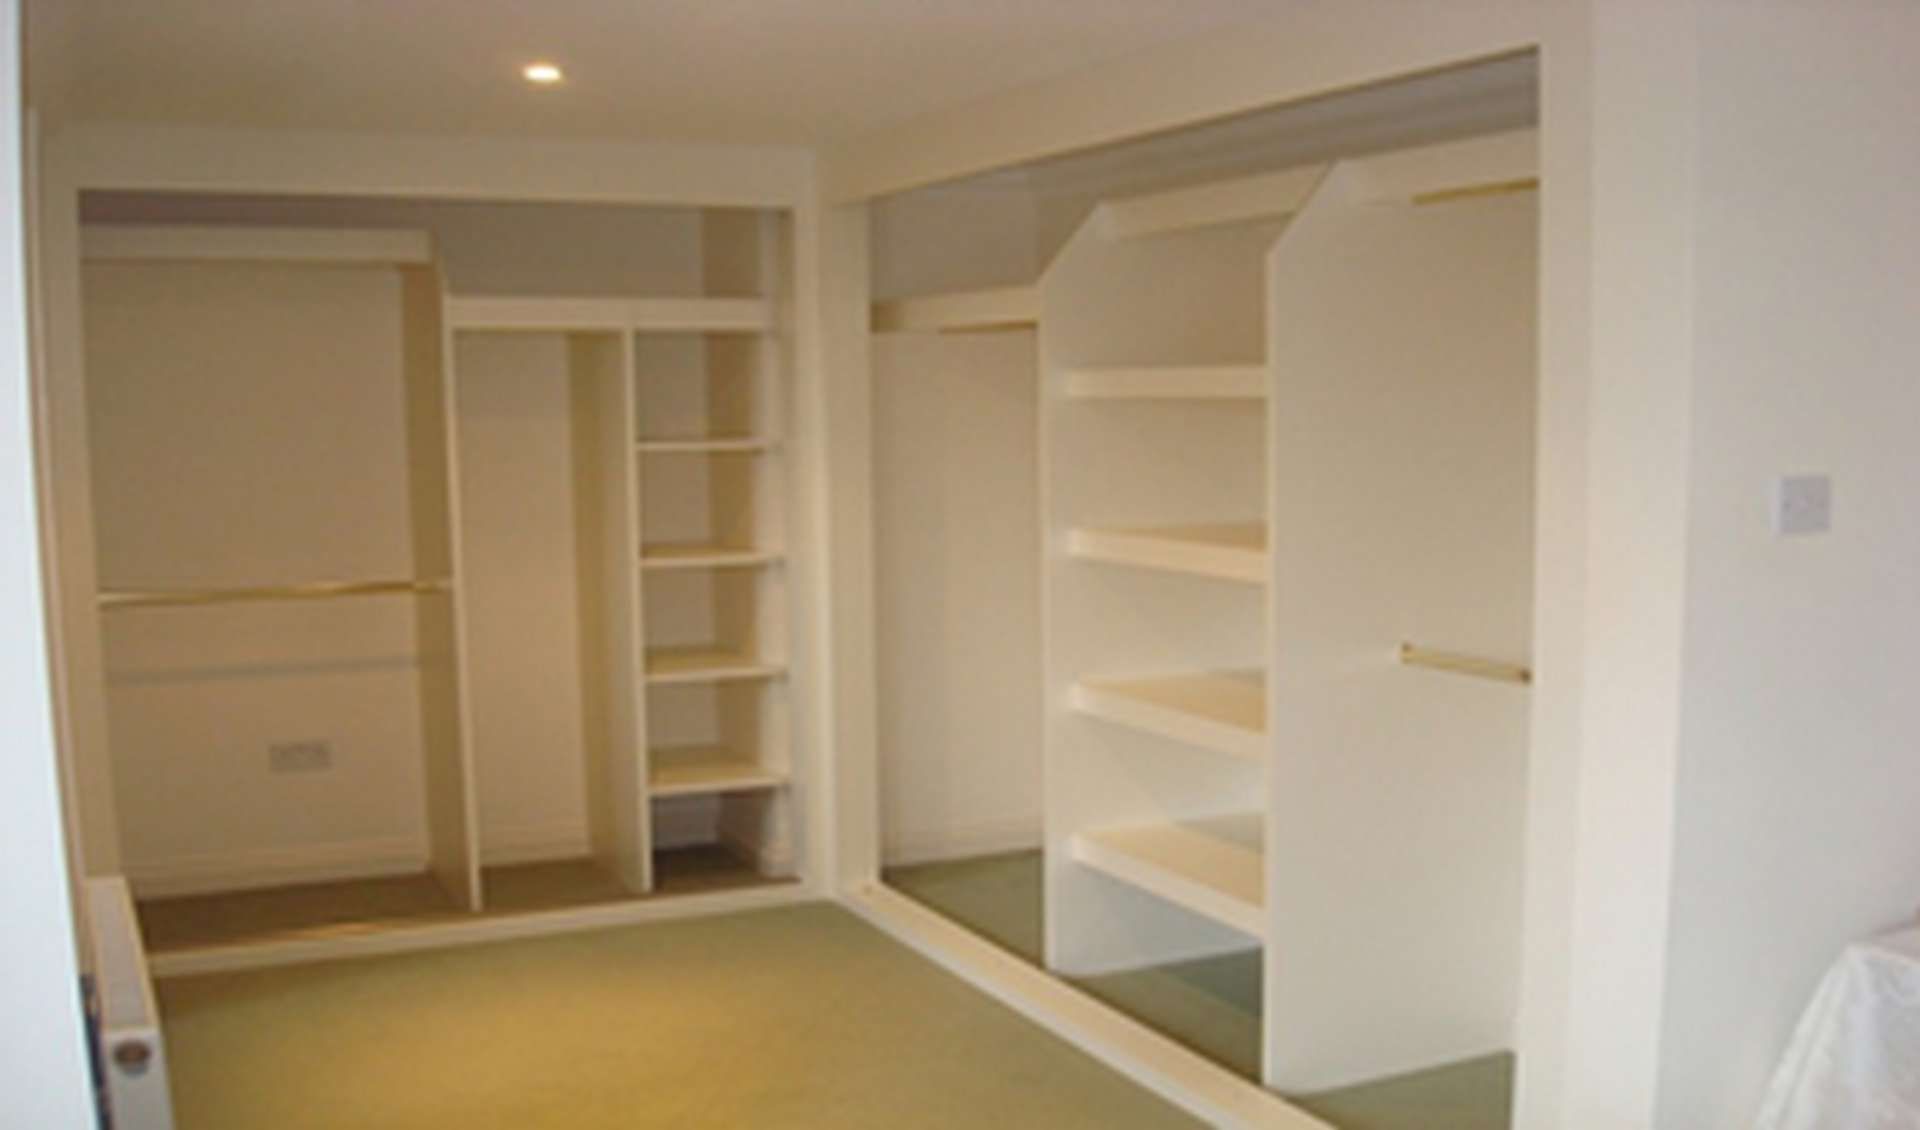 Fitted Storage Solutions | Fitted Bedroom Storage Ideas Custom World Pertaining To Bedroom Wardrobes Storages (Gallery 13 of 20)